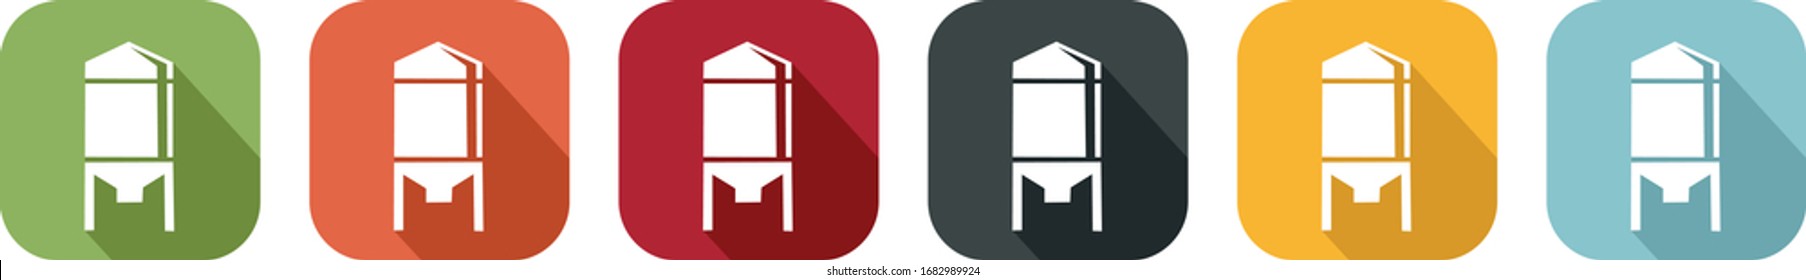 Set of coloured icons of silos